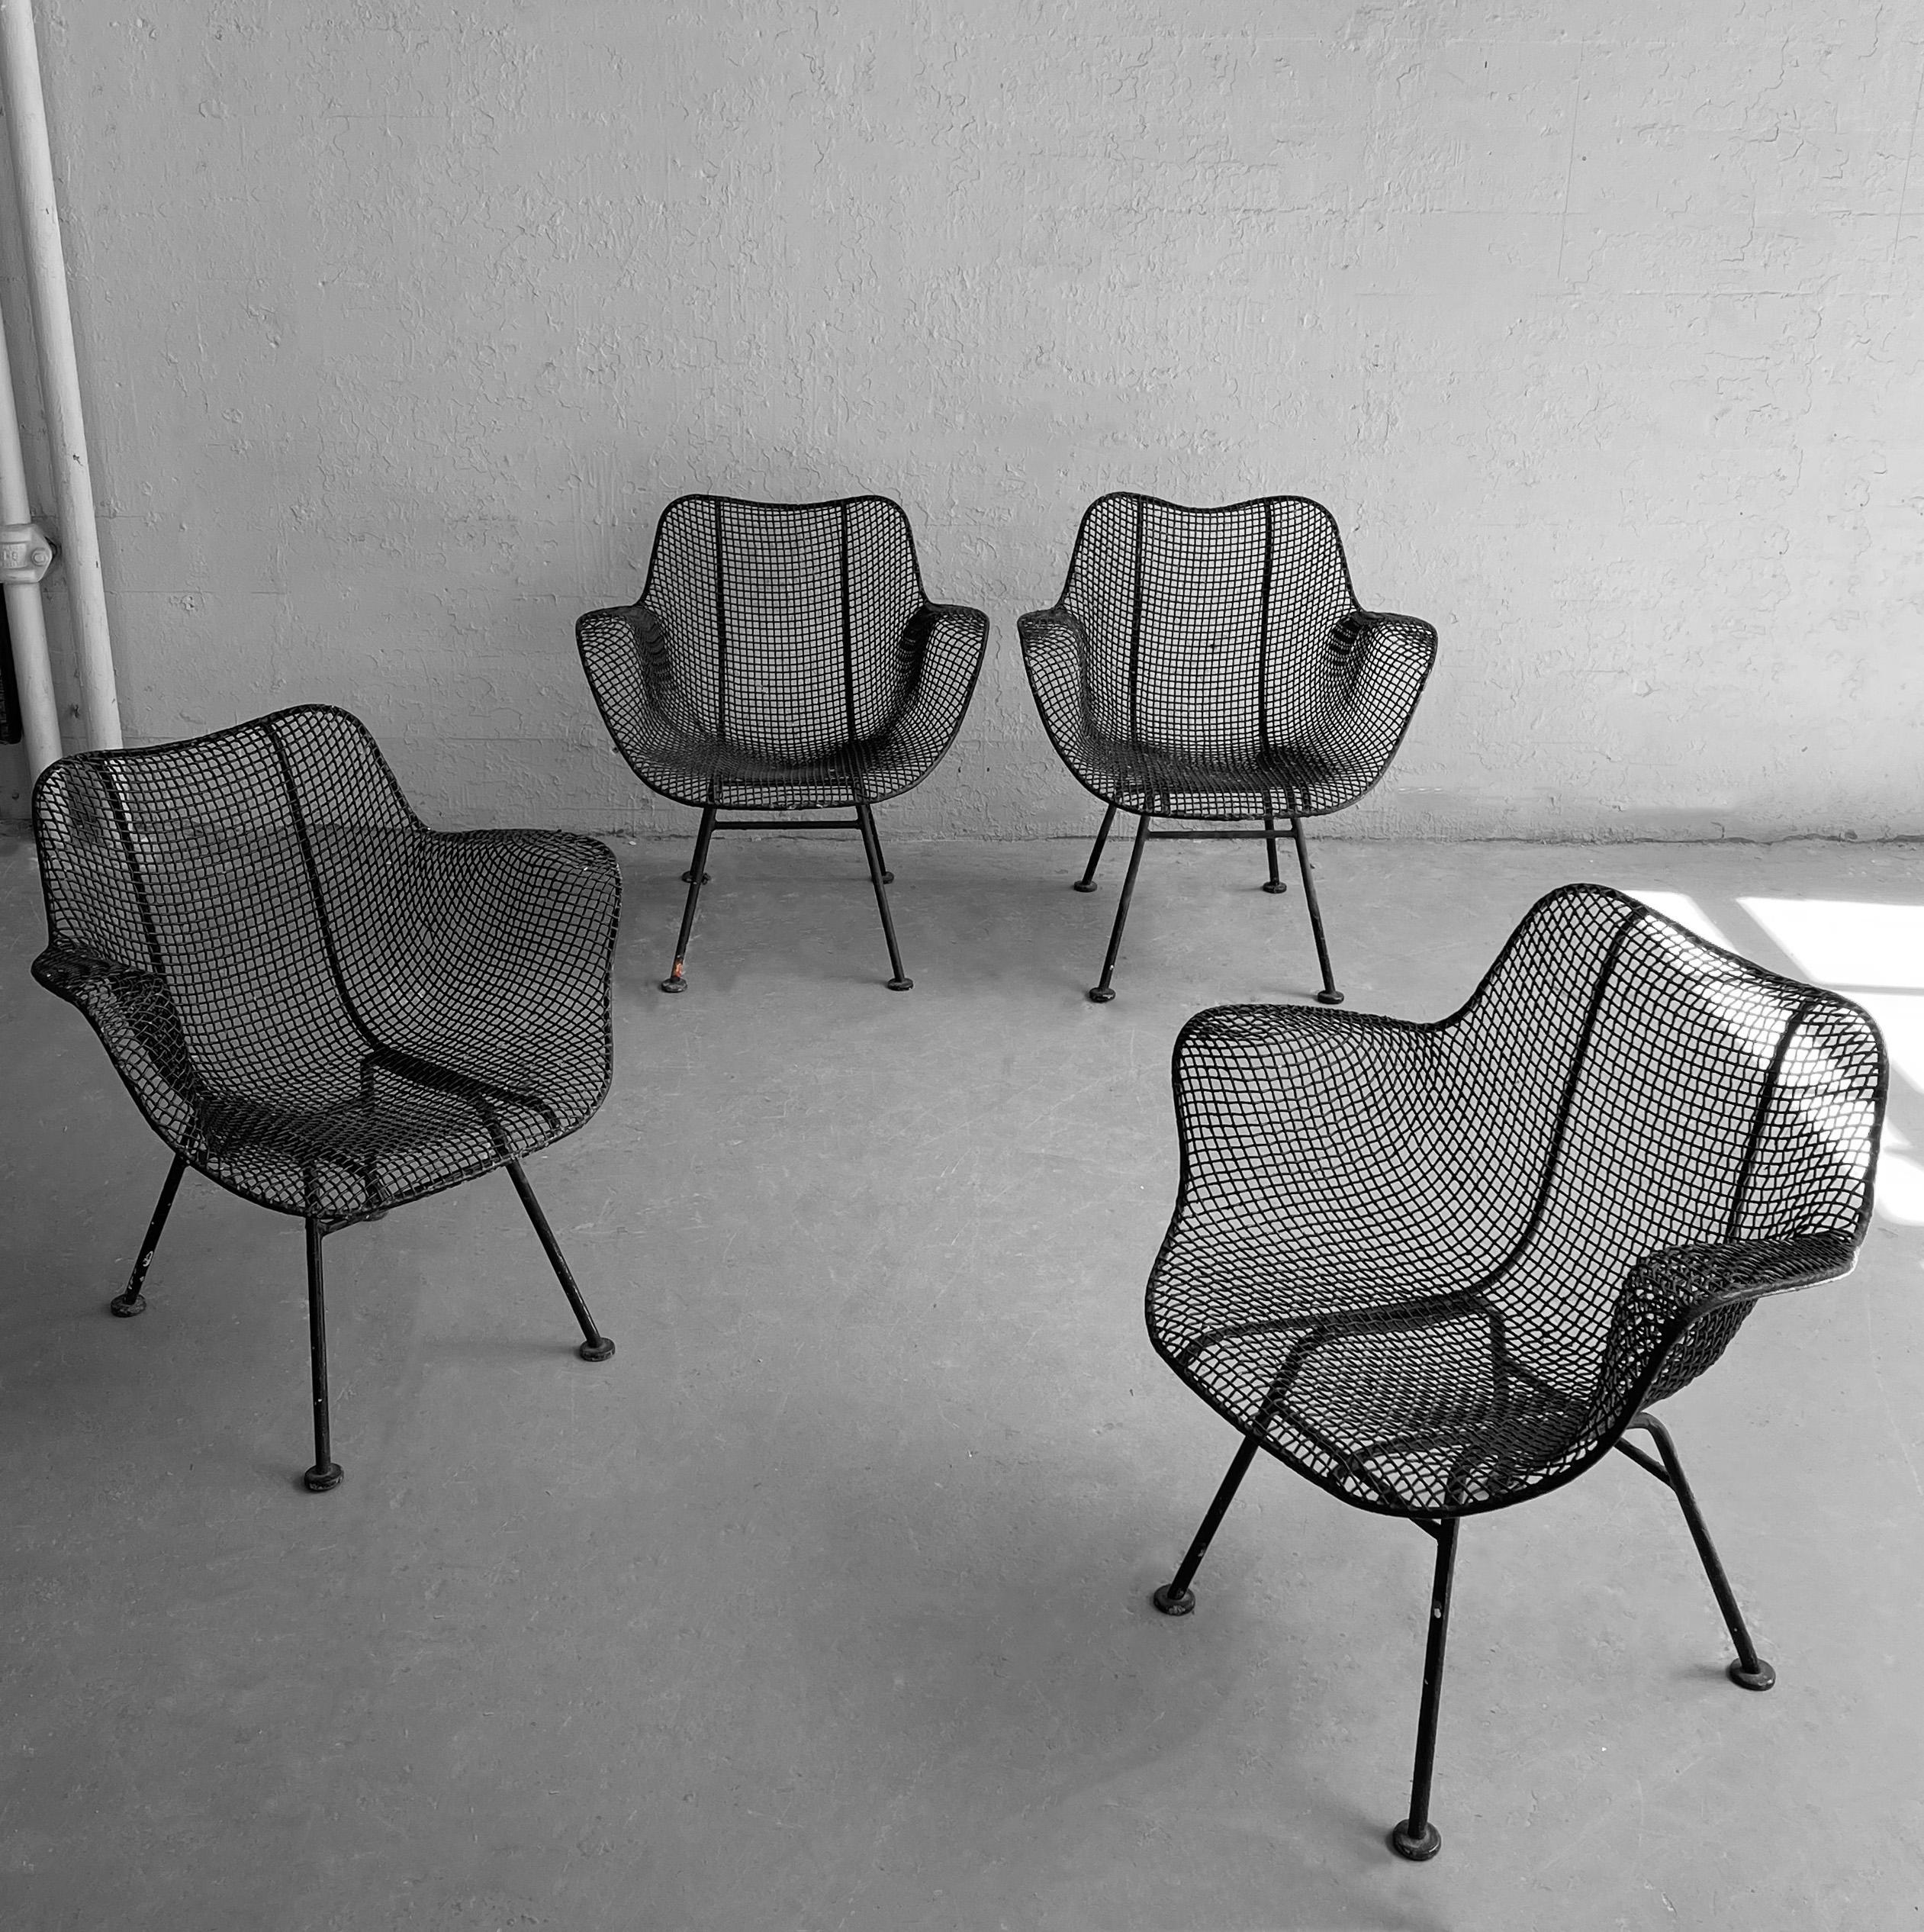 Set of four, iconic, Mid-Century Modern, wrought iron mesh and steel, outdoor/patio, armchairs by Russell Woodard, Sculptura.